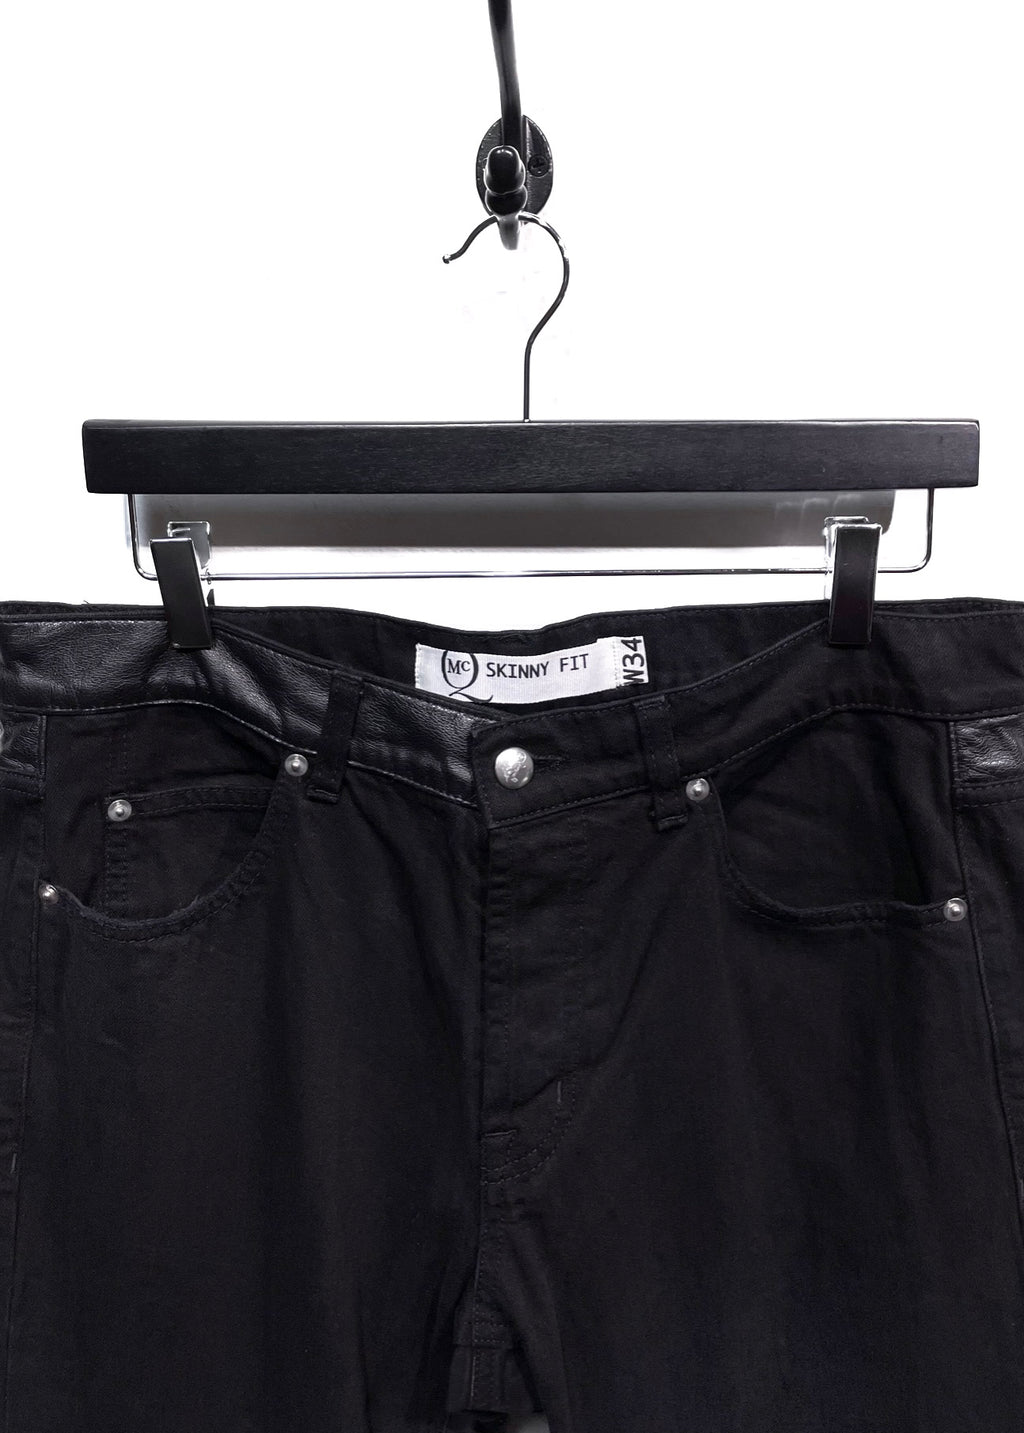 McQ McQueen Black Skinny Jeans With Faux Leather Detailing